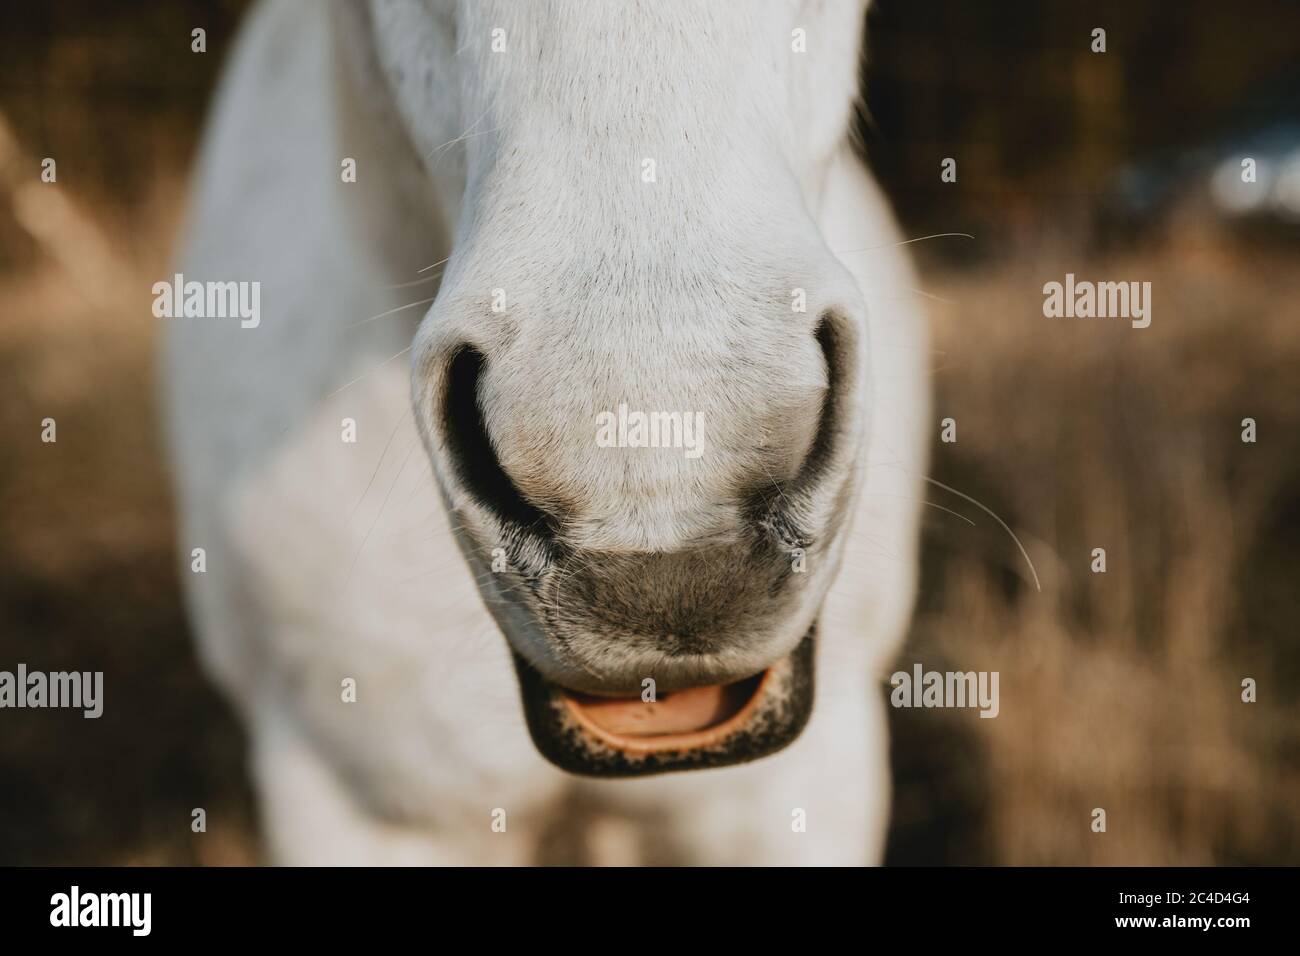 Detail of the white horse's nostrils with opened mouth, looking like laughing horse Stock Photo